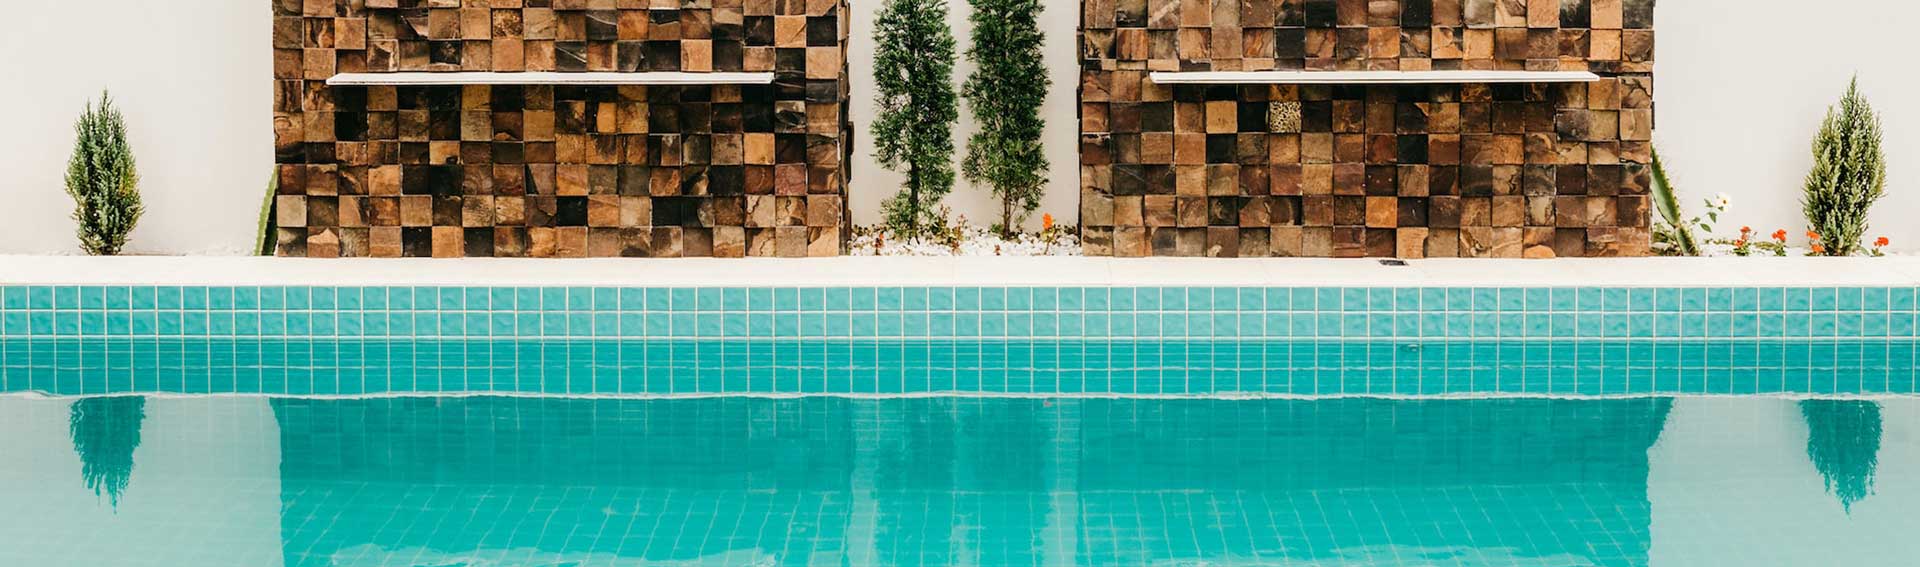 Image presents Pool and Outdoor Tiling